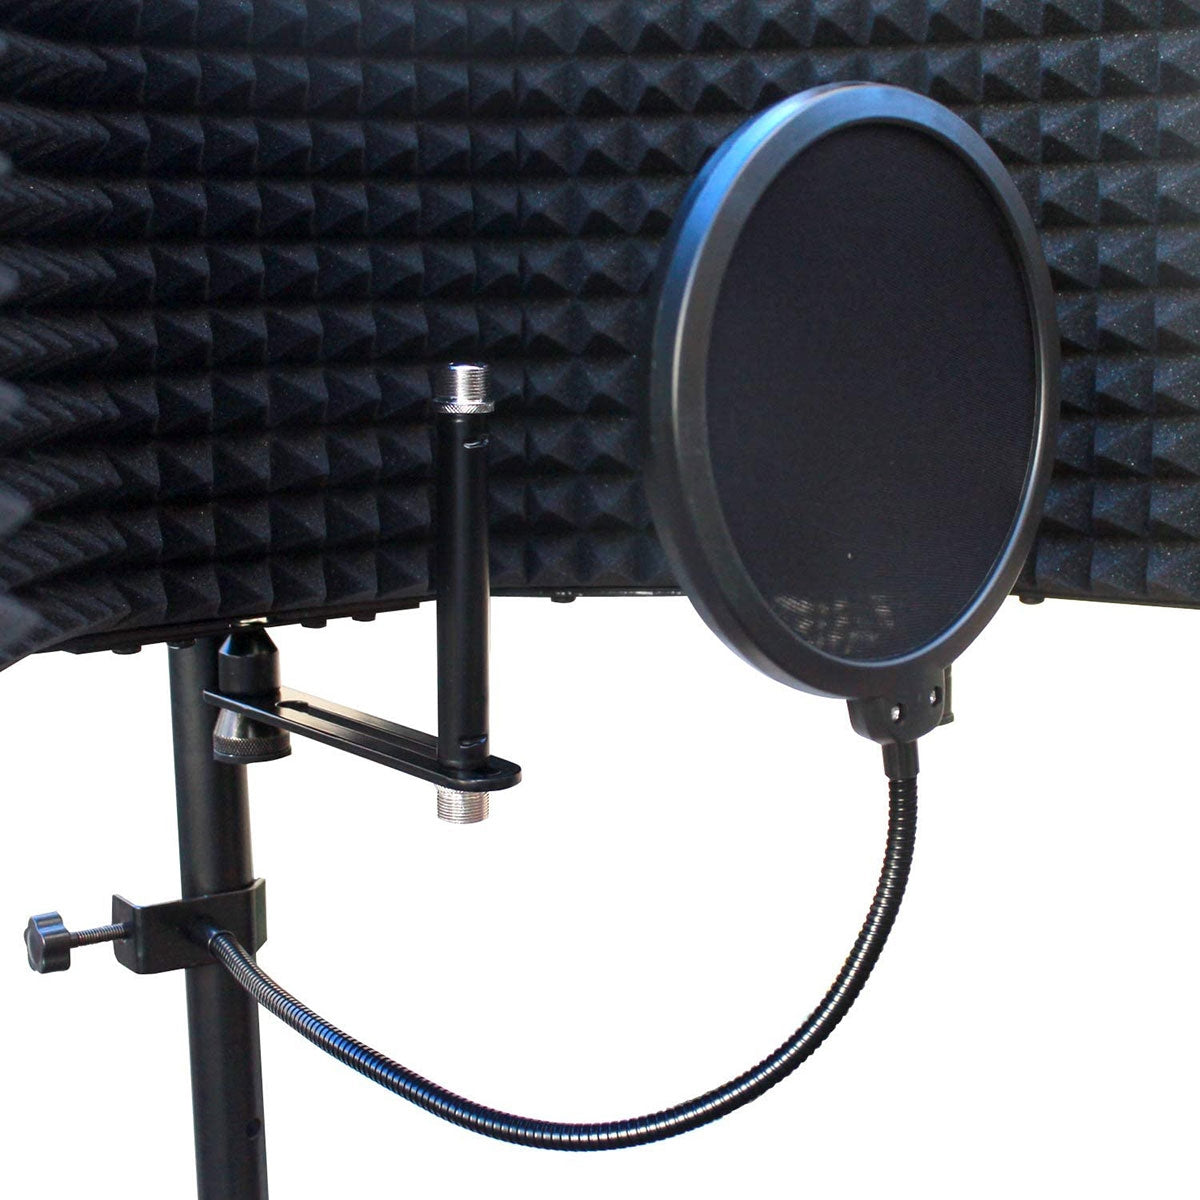 AxcessAbles Recording Studio Microphone Isolation Shield with Tripod Stand 4ft to 6ft 6" adjustable Mic Stand Recording booth, Podcast Sound booth. Compatible w/Blue Yeti, AT2020 (SF-101KIT ) - Open Box